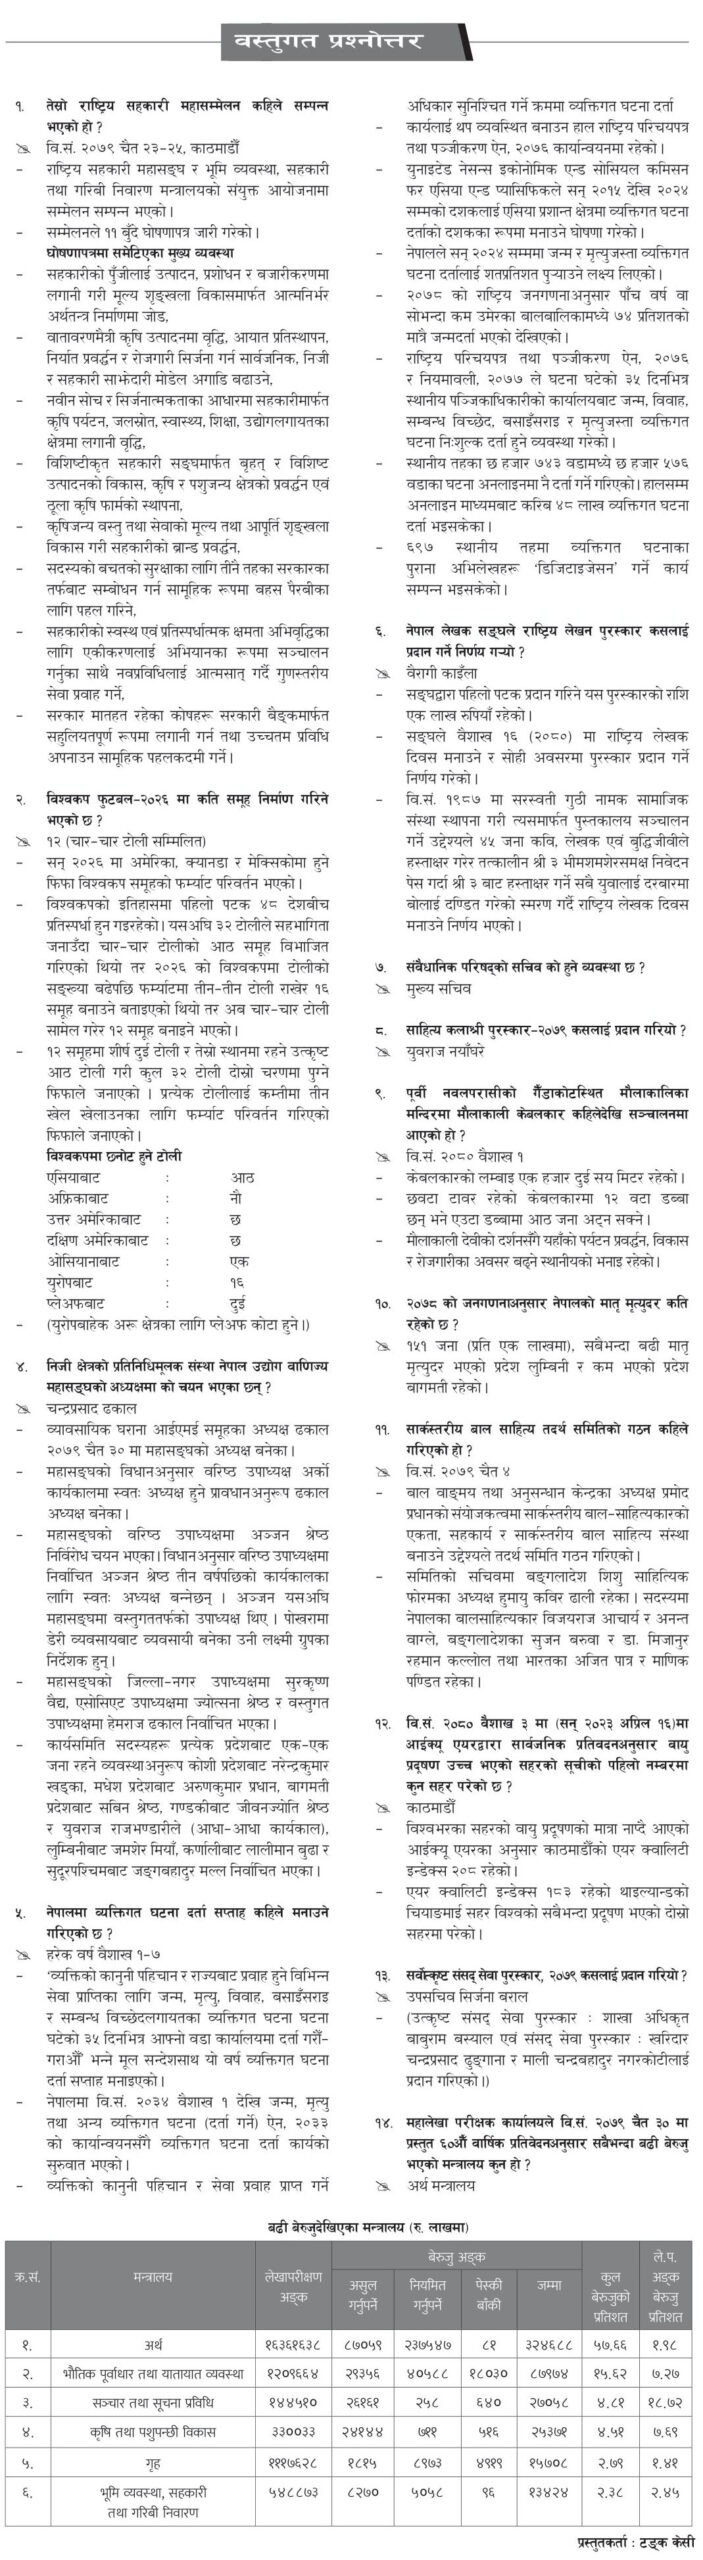 Gorkhapatra Material Objective Question Answer published in 2080 Baishak 06